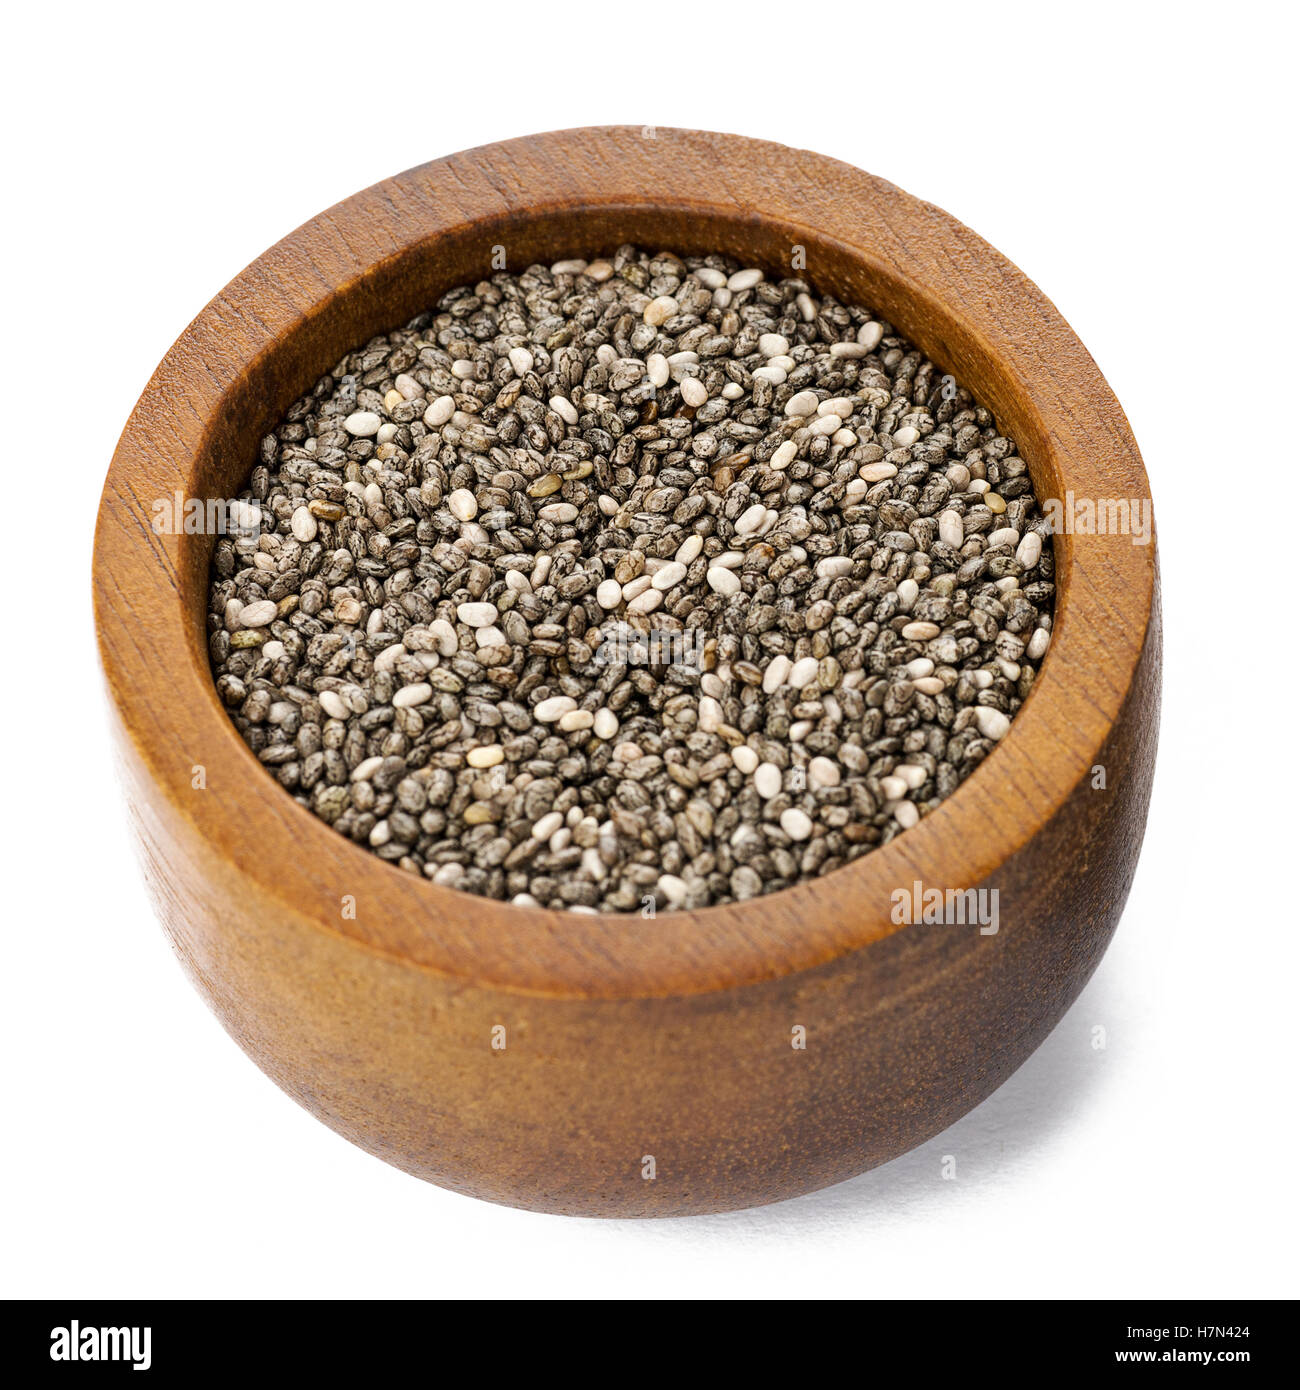 Square image of chia seeds in a small wooden dish ,isolated on white Stock Photo